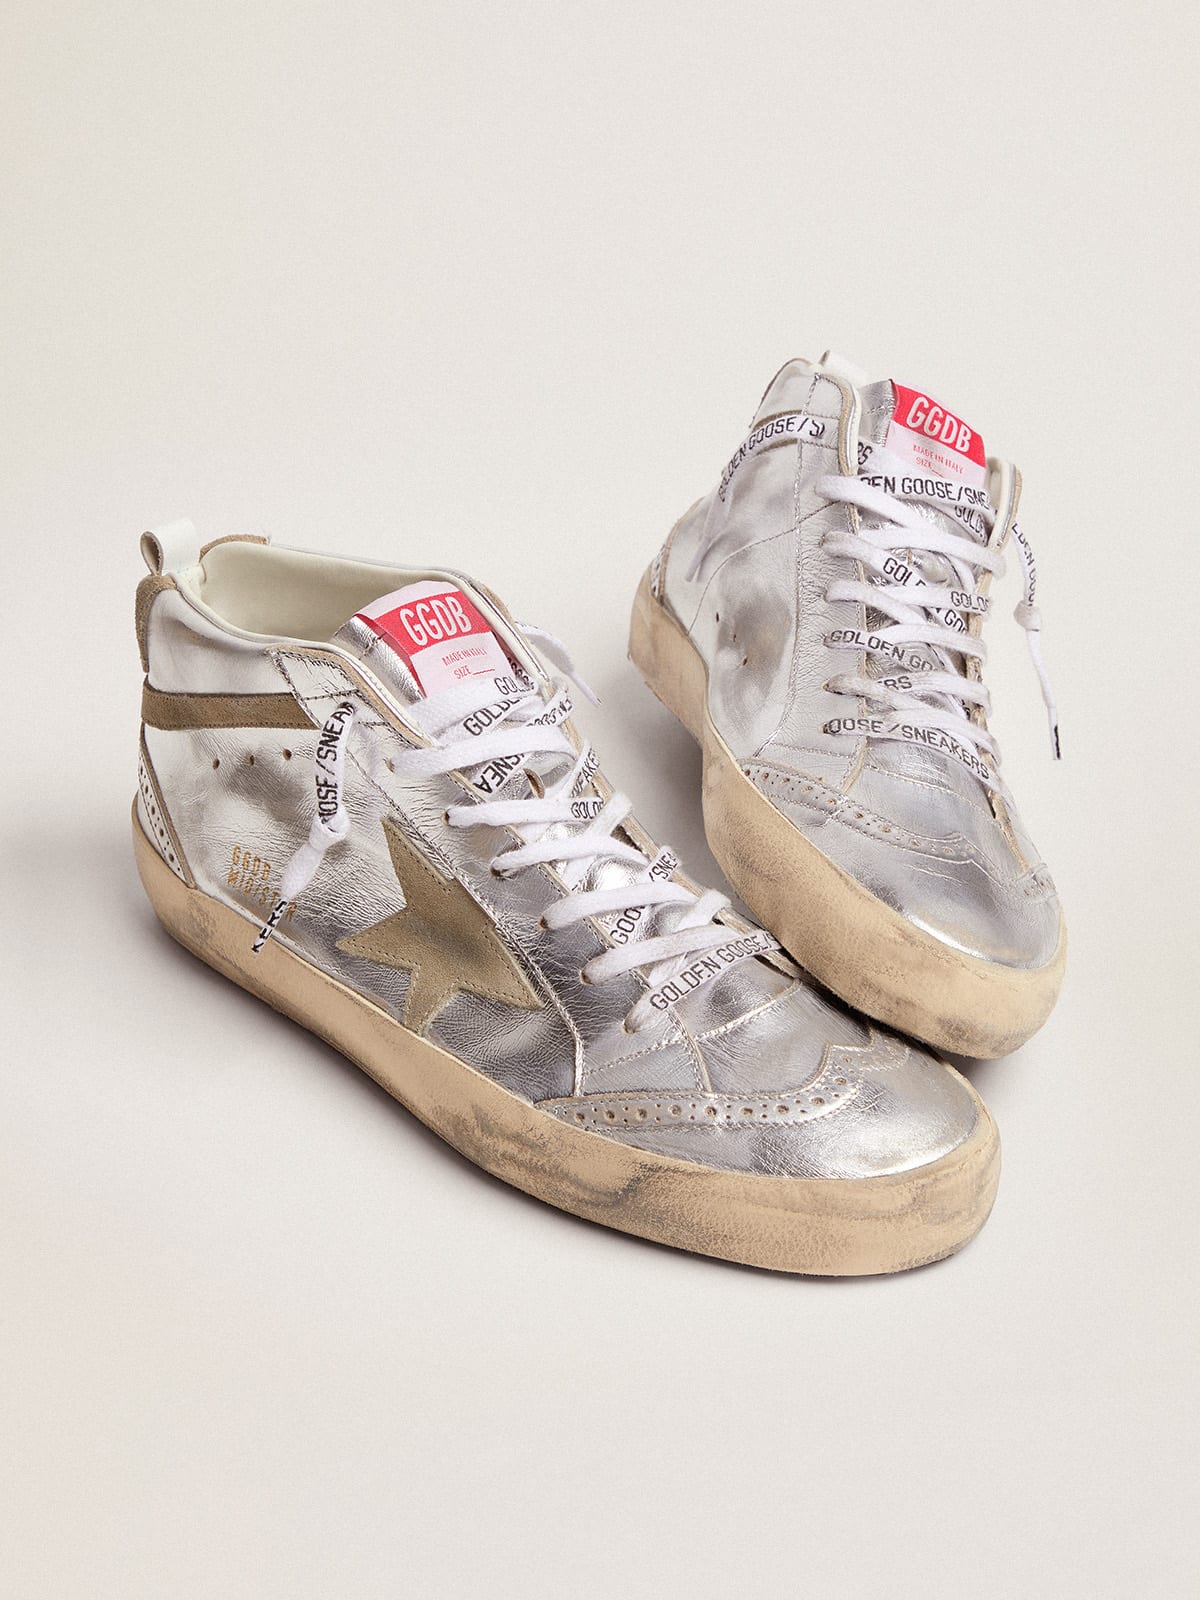 Golden Goose - Women's Mid Star in silver laminated leather with dove gray star in 